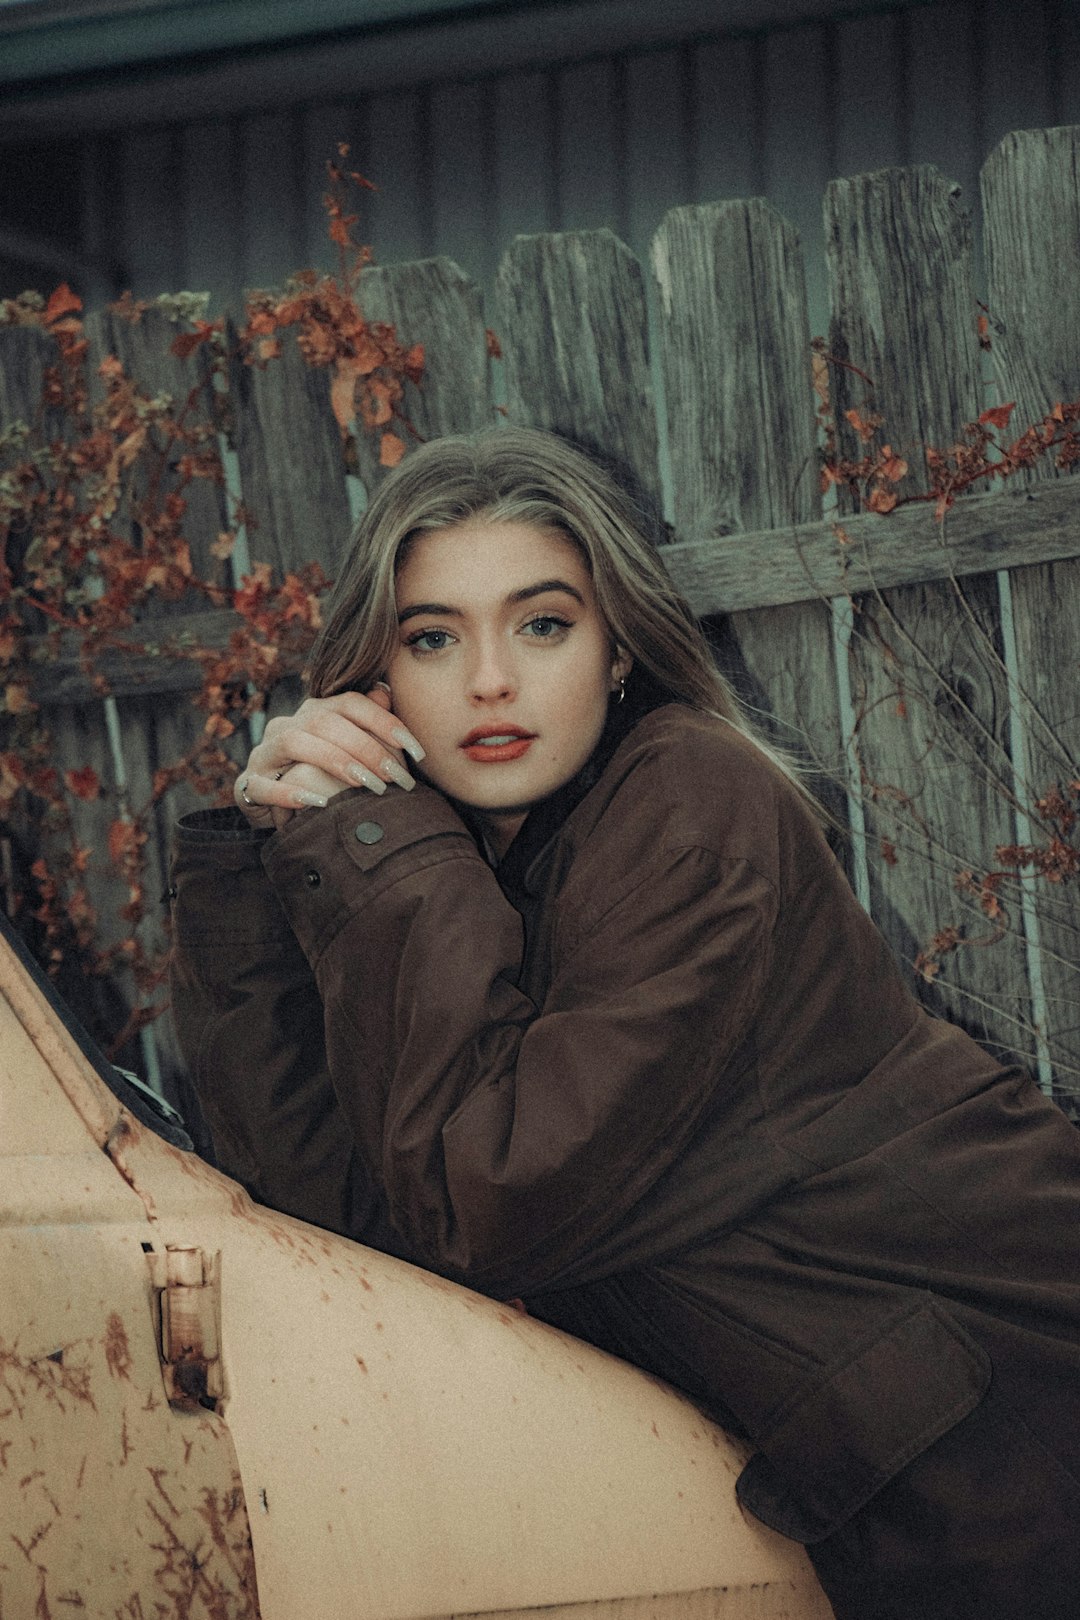 woman in brown coat sitting on brown wooden bench